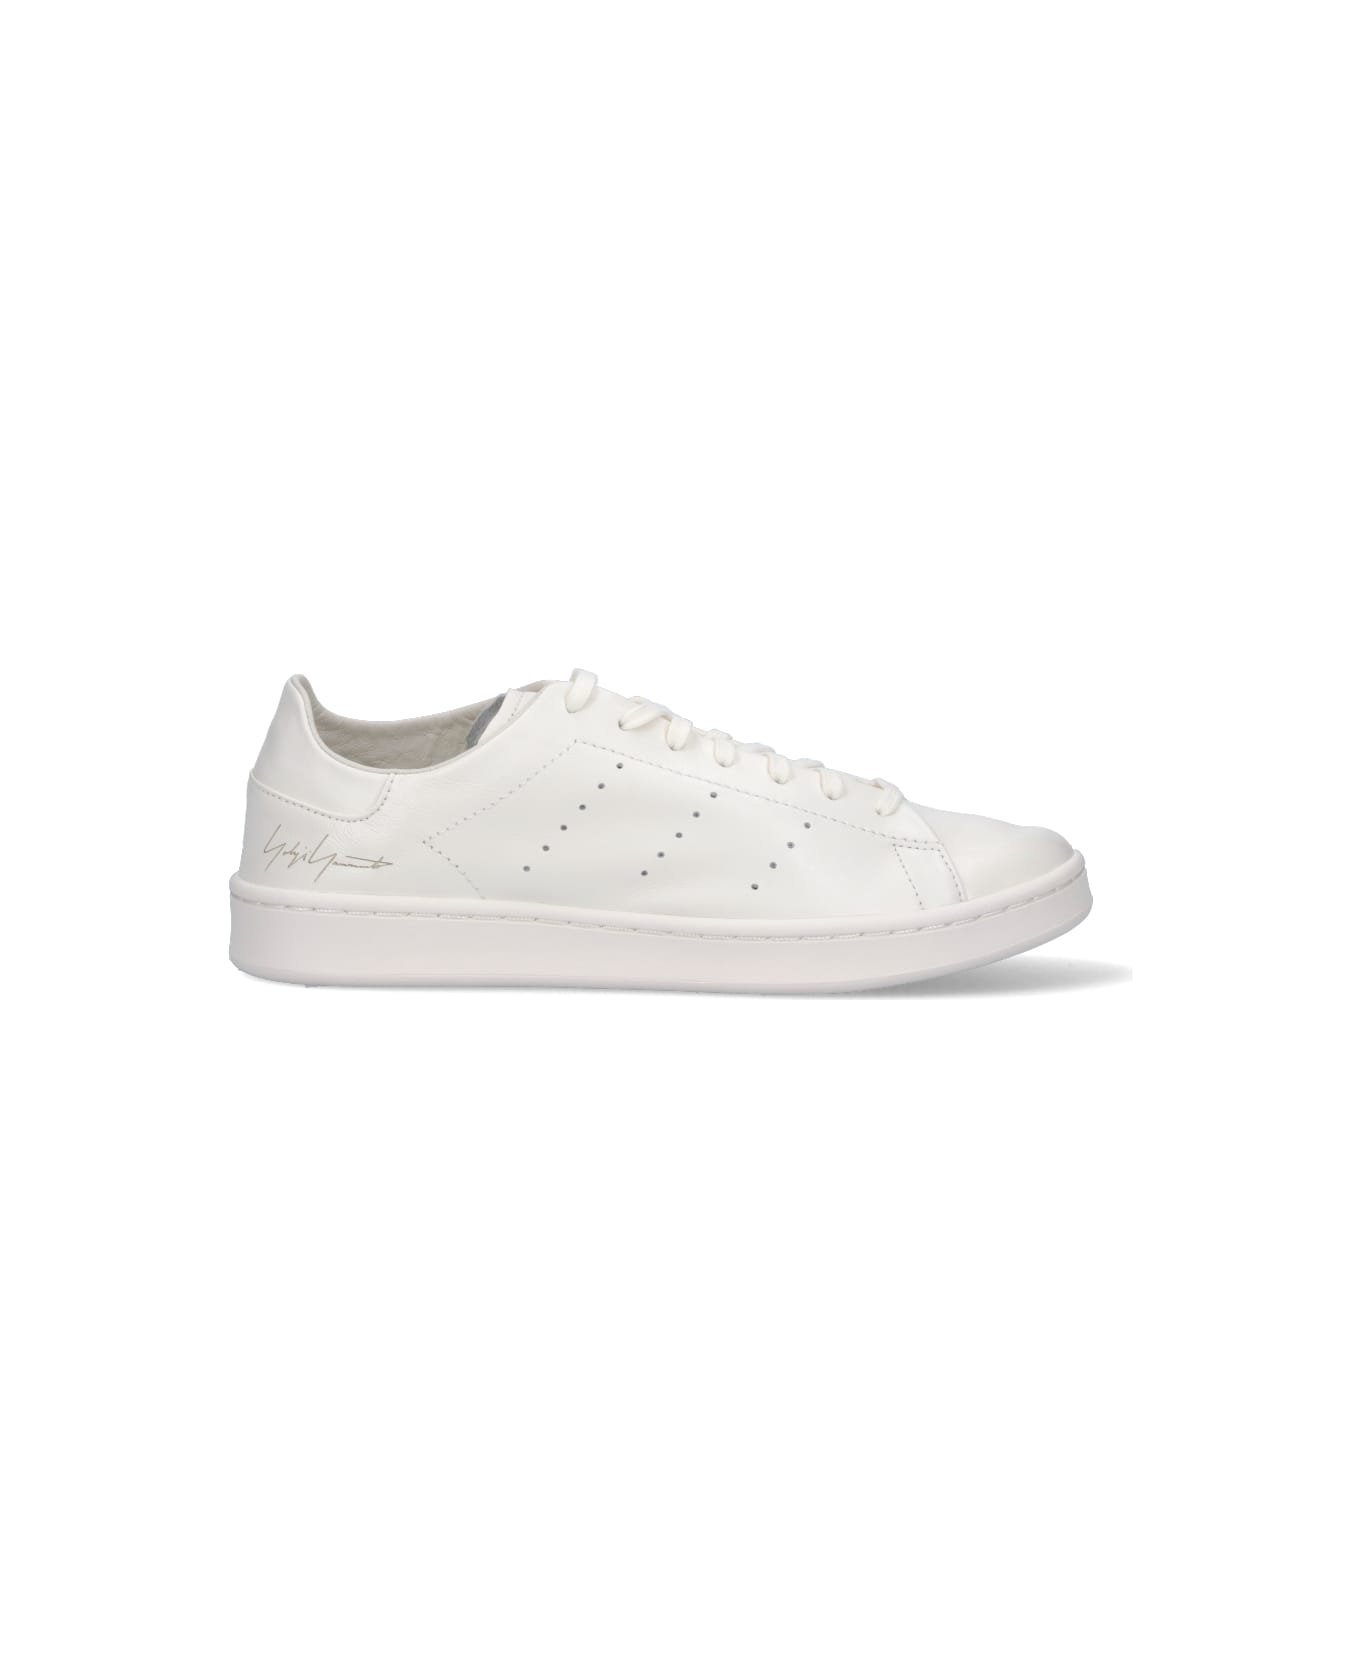 Y-3 "stan Smith" Sneakers - White スニーカー